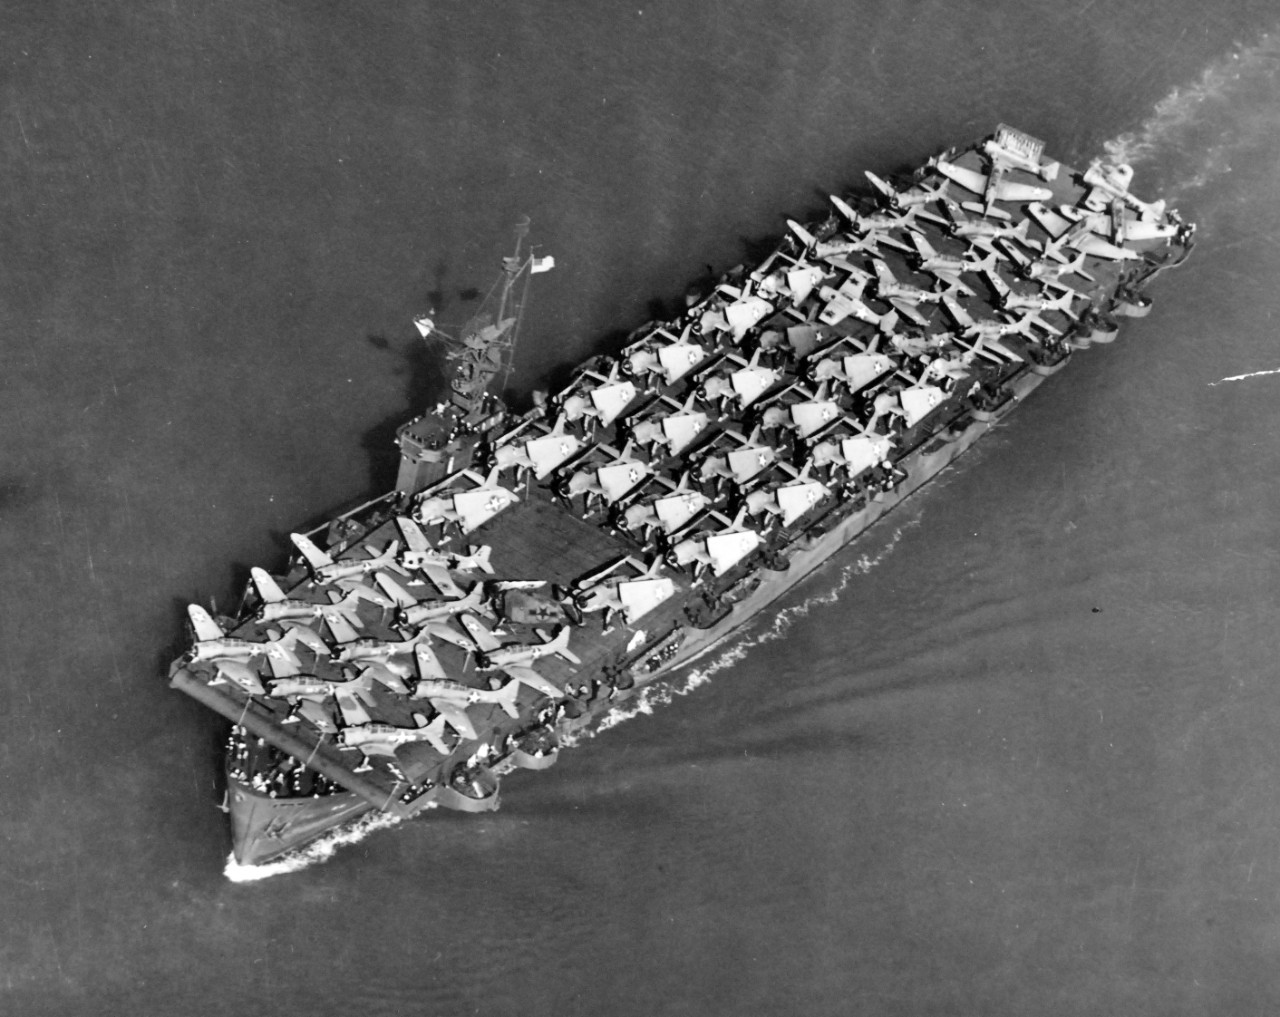 80-G-82901:  USS Liscome Bay (CVE-56), September 20, 1943.  Note the SBD’s and TBF’s spotted on the flight deck.  Official U.S. Navy Photograph, now in the collections of the National Archives.   (2018/02/28).  